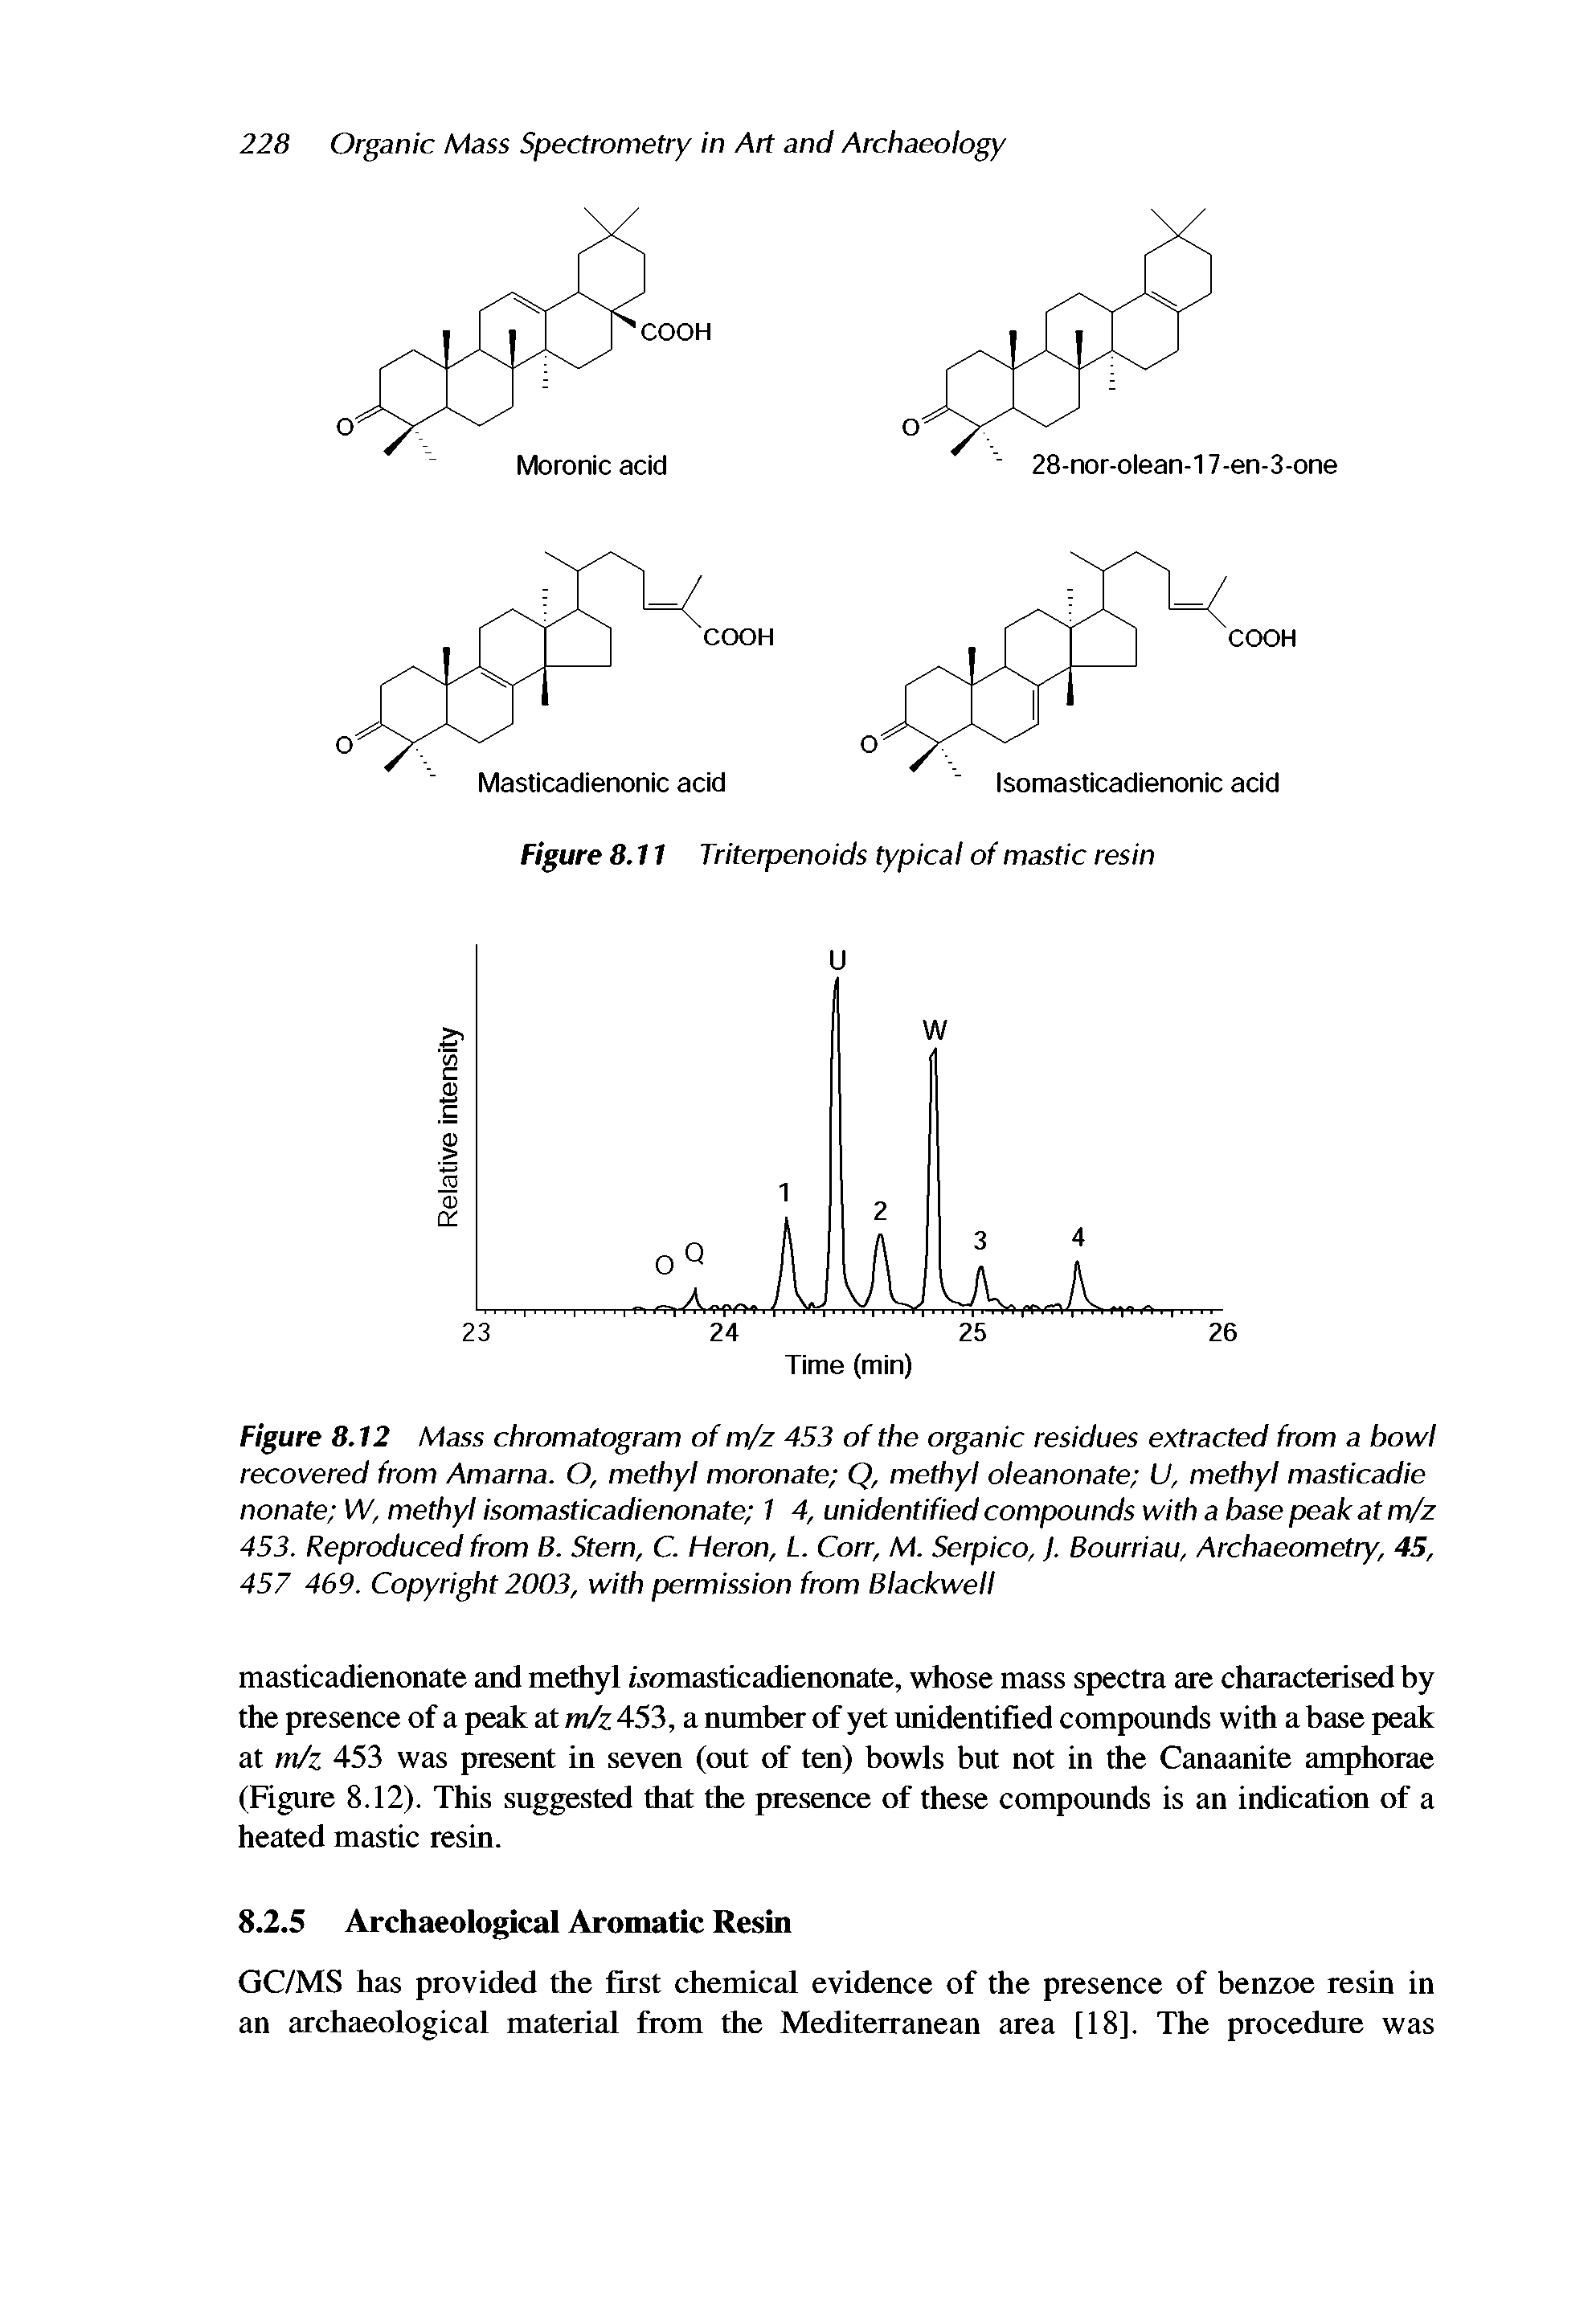 Figure 8.12 Mass chromatogram of m/z 453 of the organic residues extracted from a bowl recovered from Amarna. O, methyl moronate Q, methyl oleanonate U, methyl masticadie nonate W, methyl isomasticadienonate 1 4, unidentified compounds with a base peak at m/z 453. Reproduced from B. Stern, C. Heron, L. Corr, M. Serpico, j. Bourriau, Archaeometry, 45, 457 469. Copyright 2003, with permission from Blackwell...